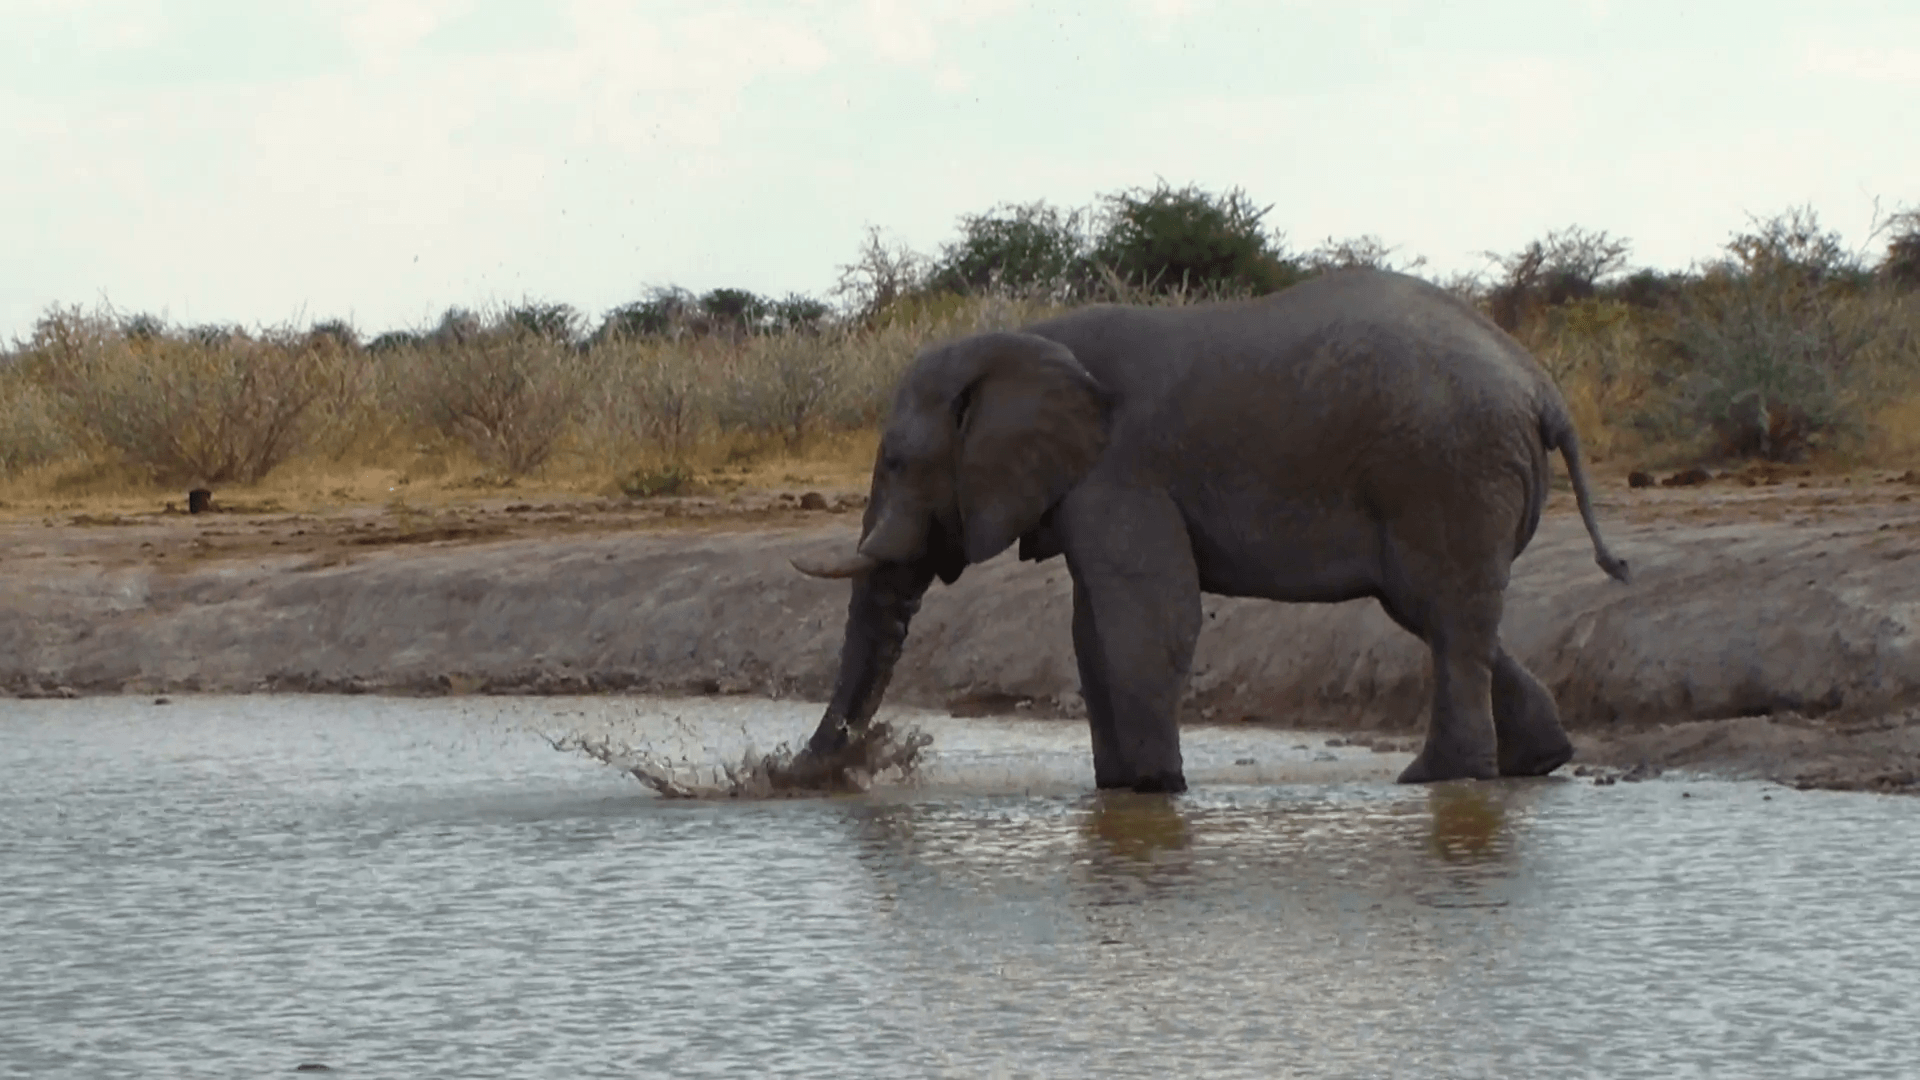 Elephant playing water and mud in a waterhole. Nxai Pan National